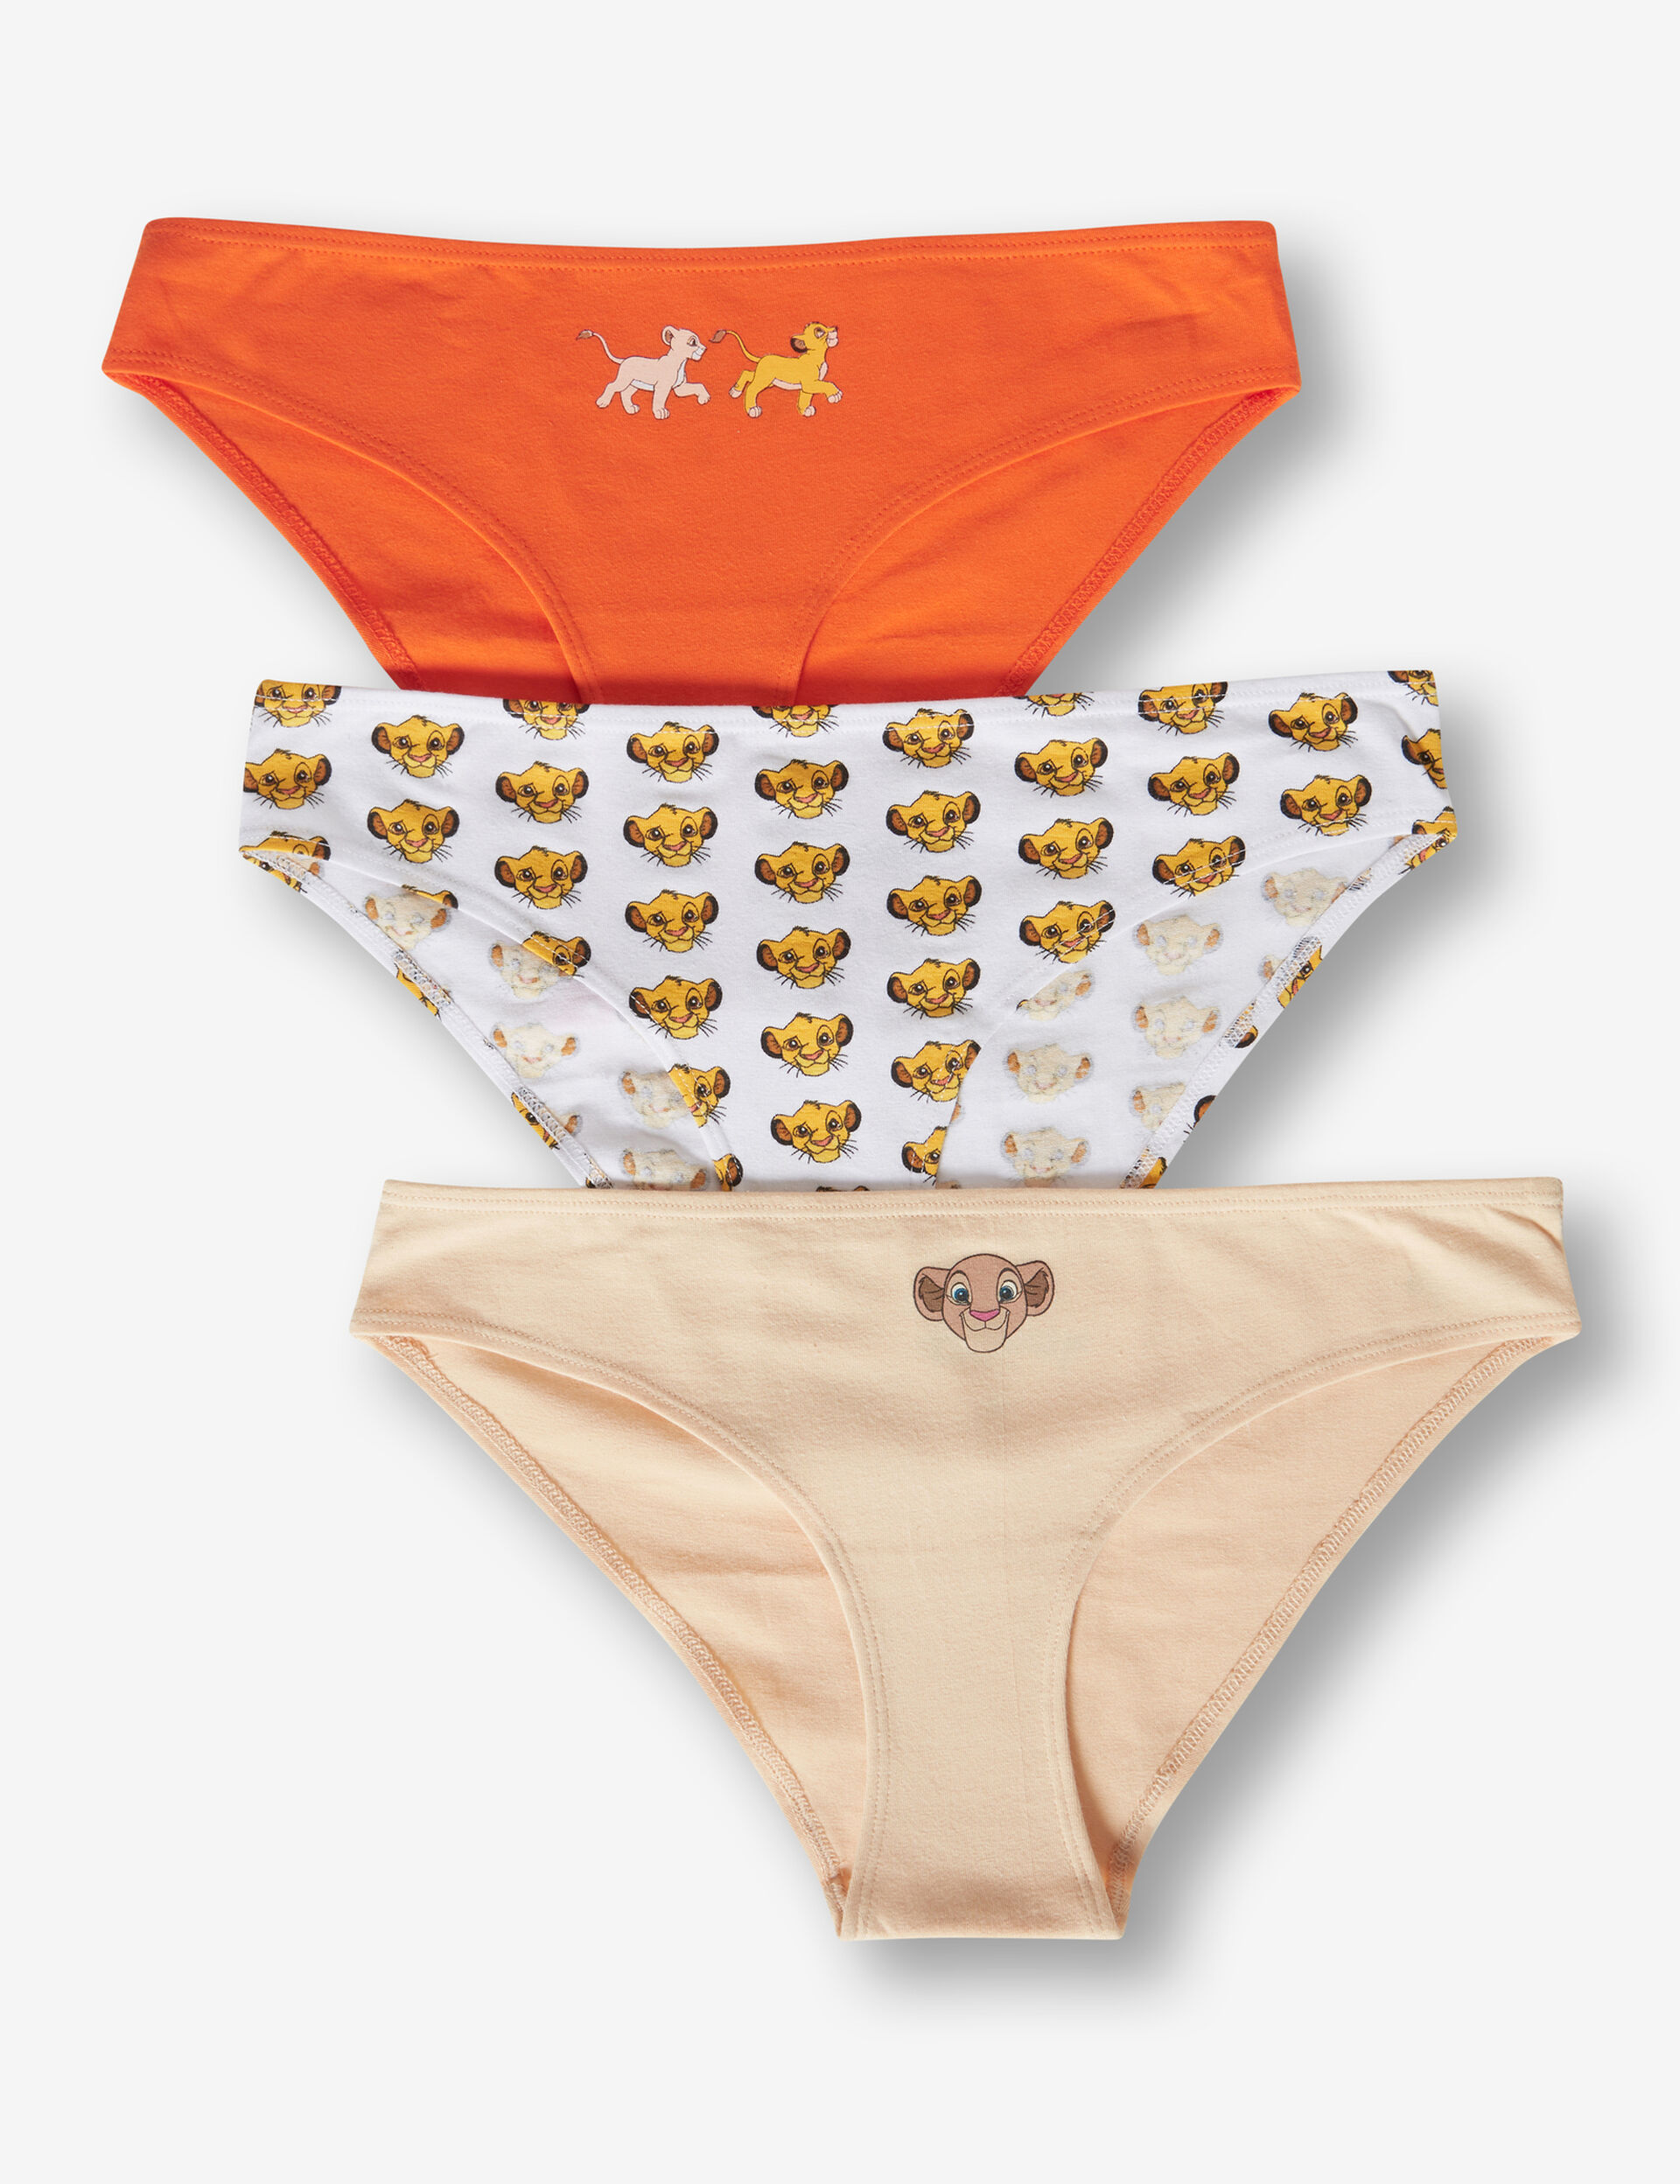 Lion King knickers